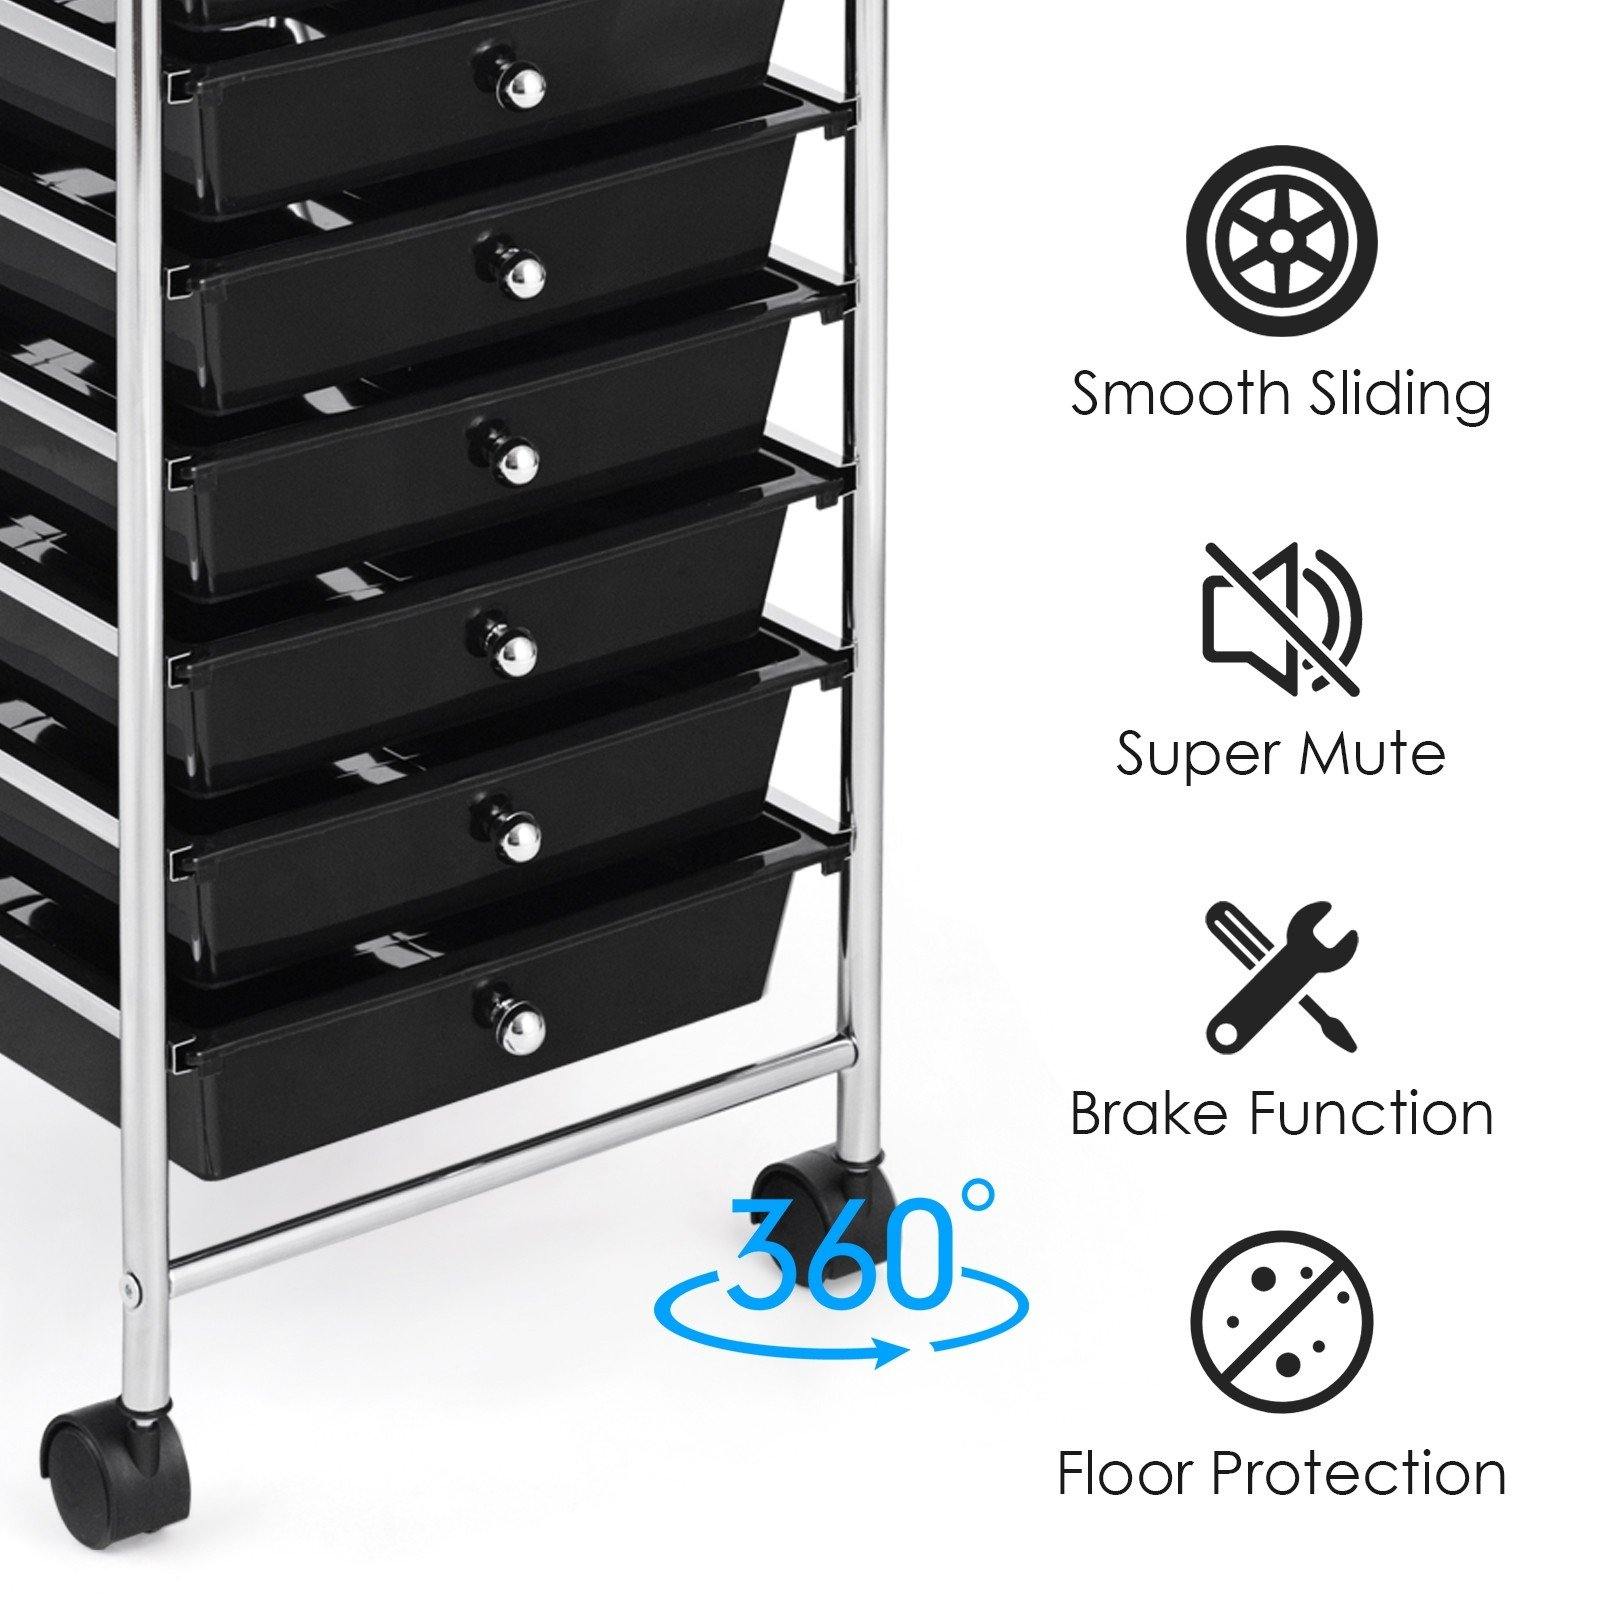 Giantex Rolling Storage Cart on Wheels with 10 Drawers